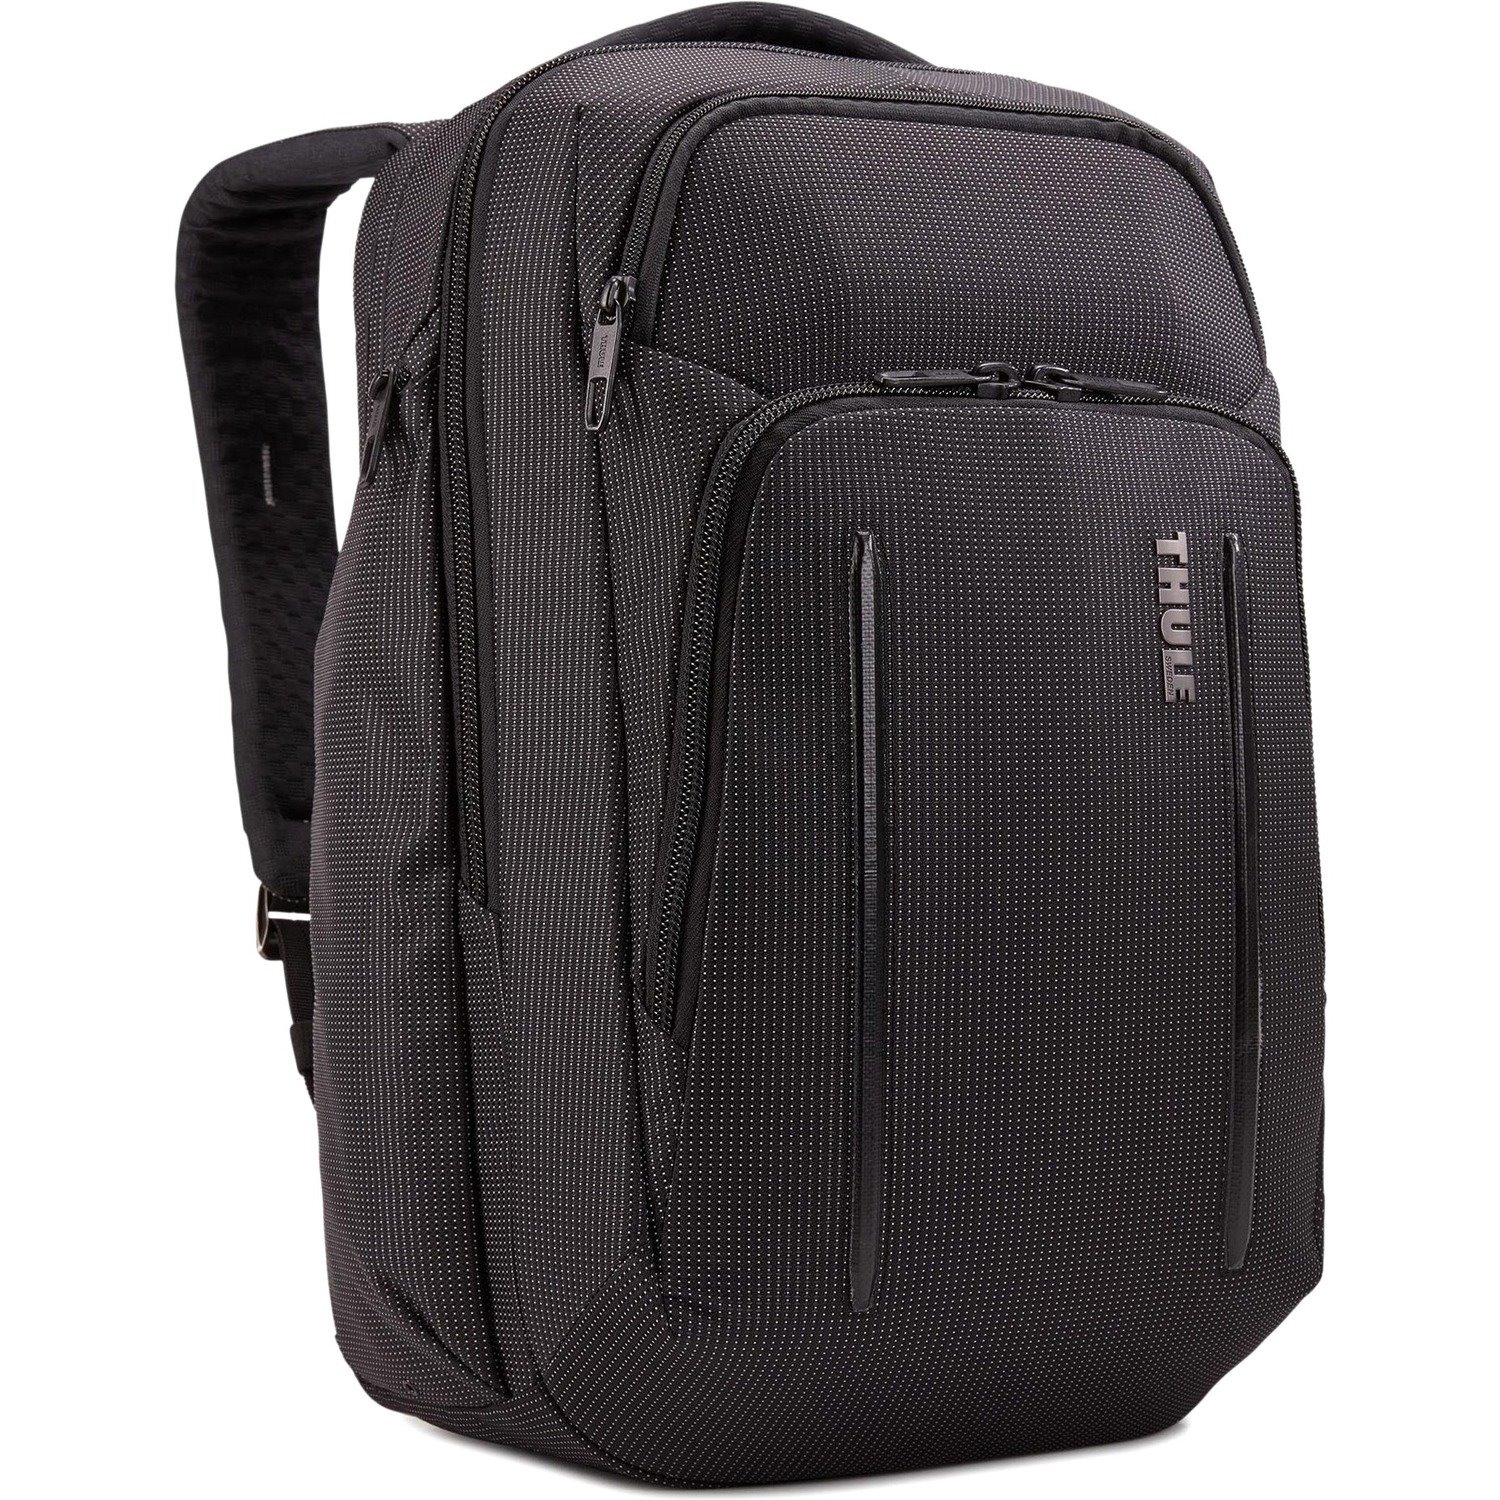 Thule Crossover 2 C2BP116 Carrying Case Accessories, Water Bottle, Notebook, Tablet PC - Black